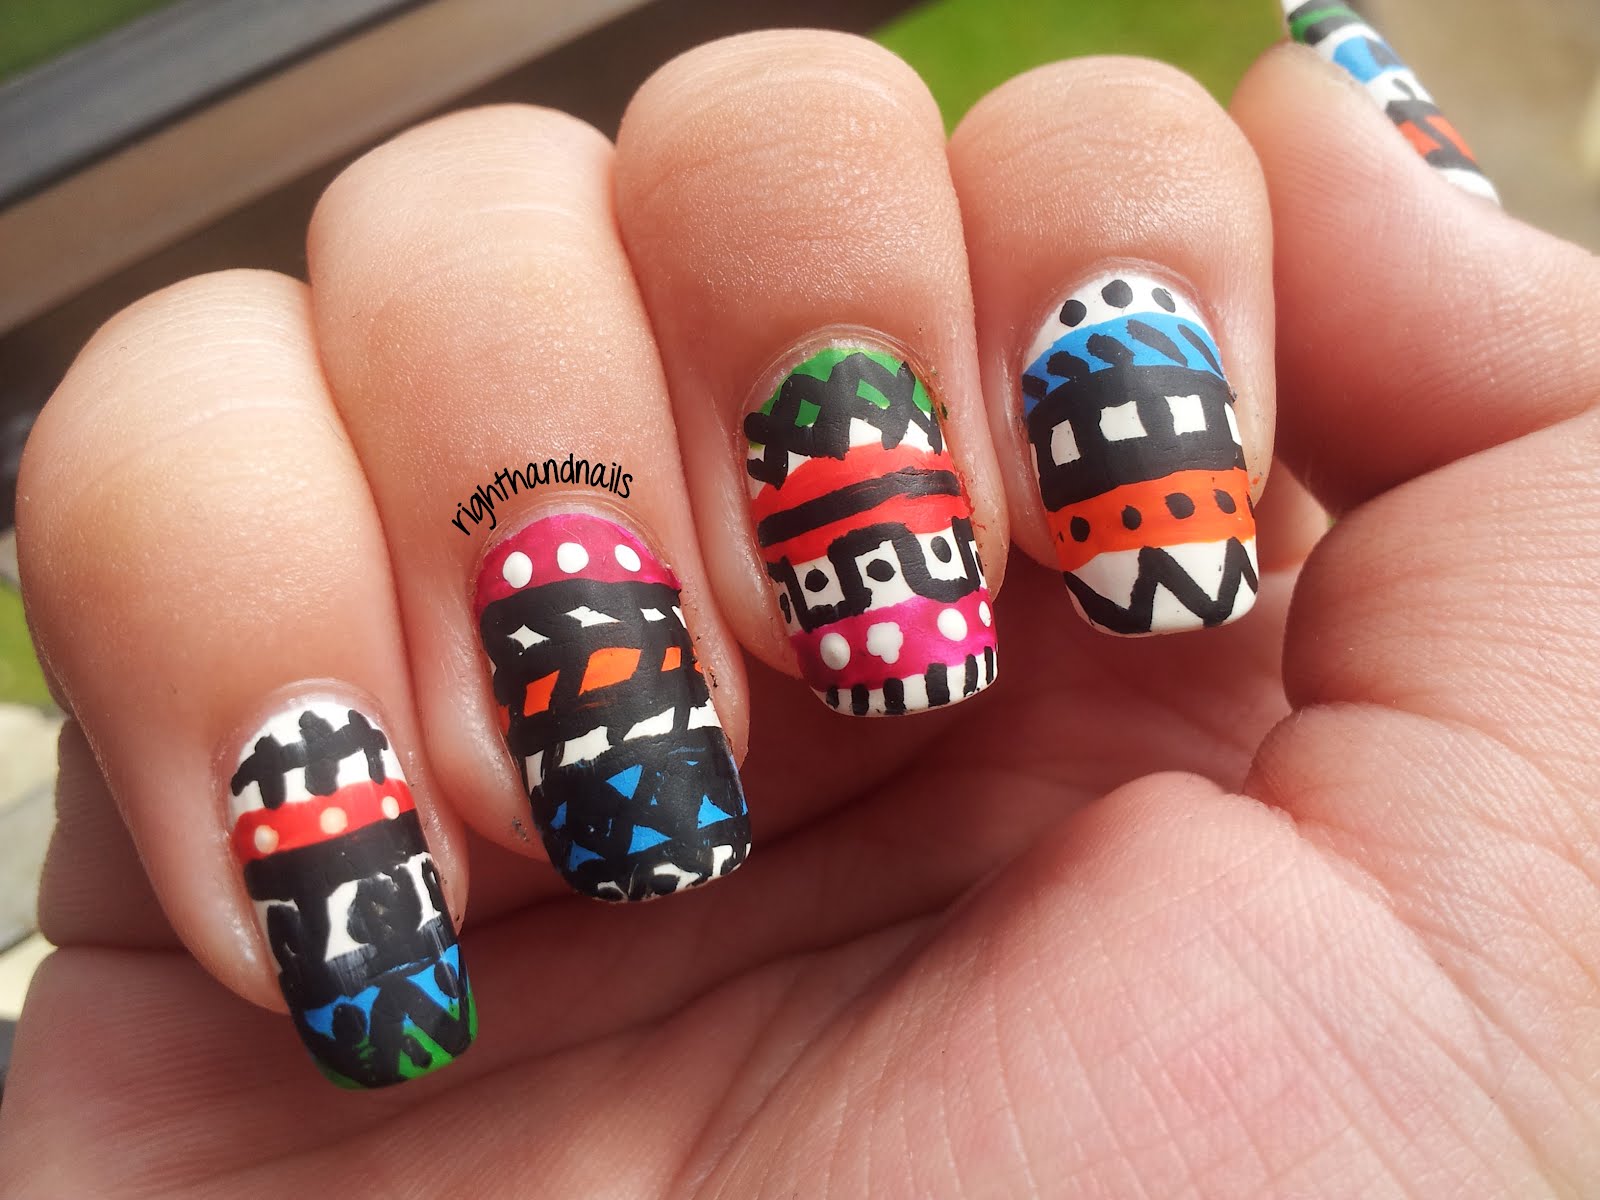 1. Tribal Nail Designs on Pinterest - wide 7